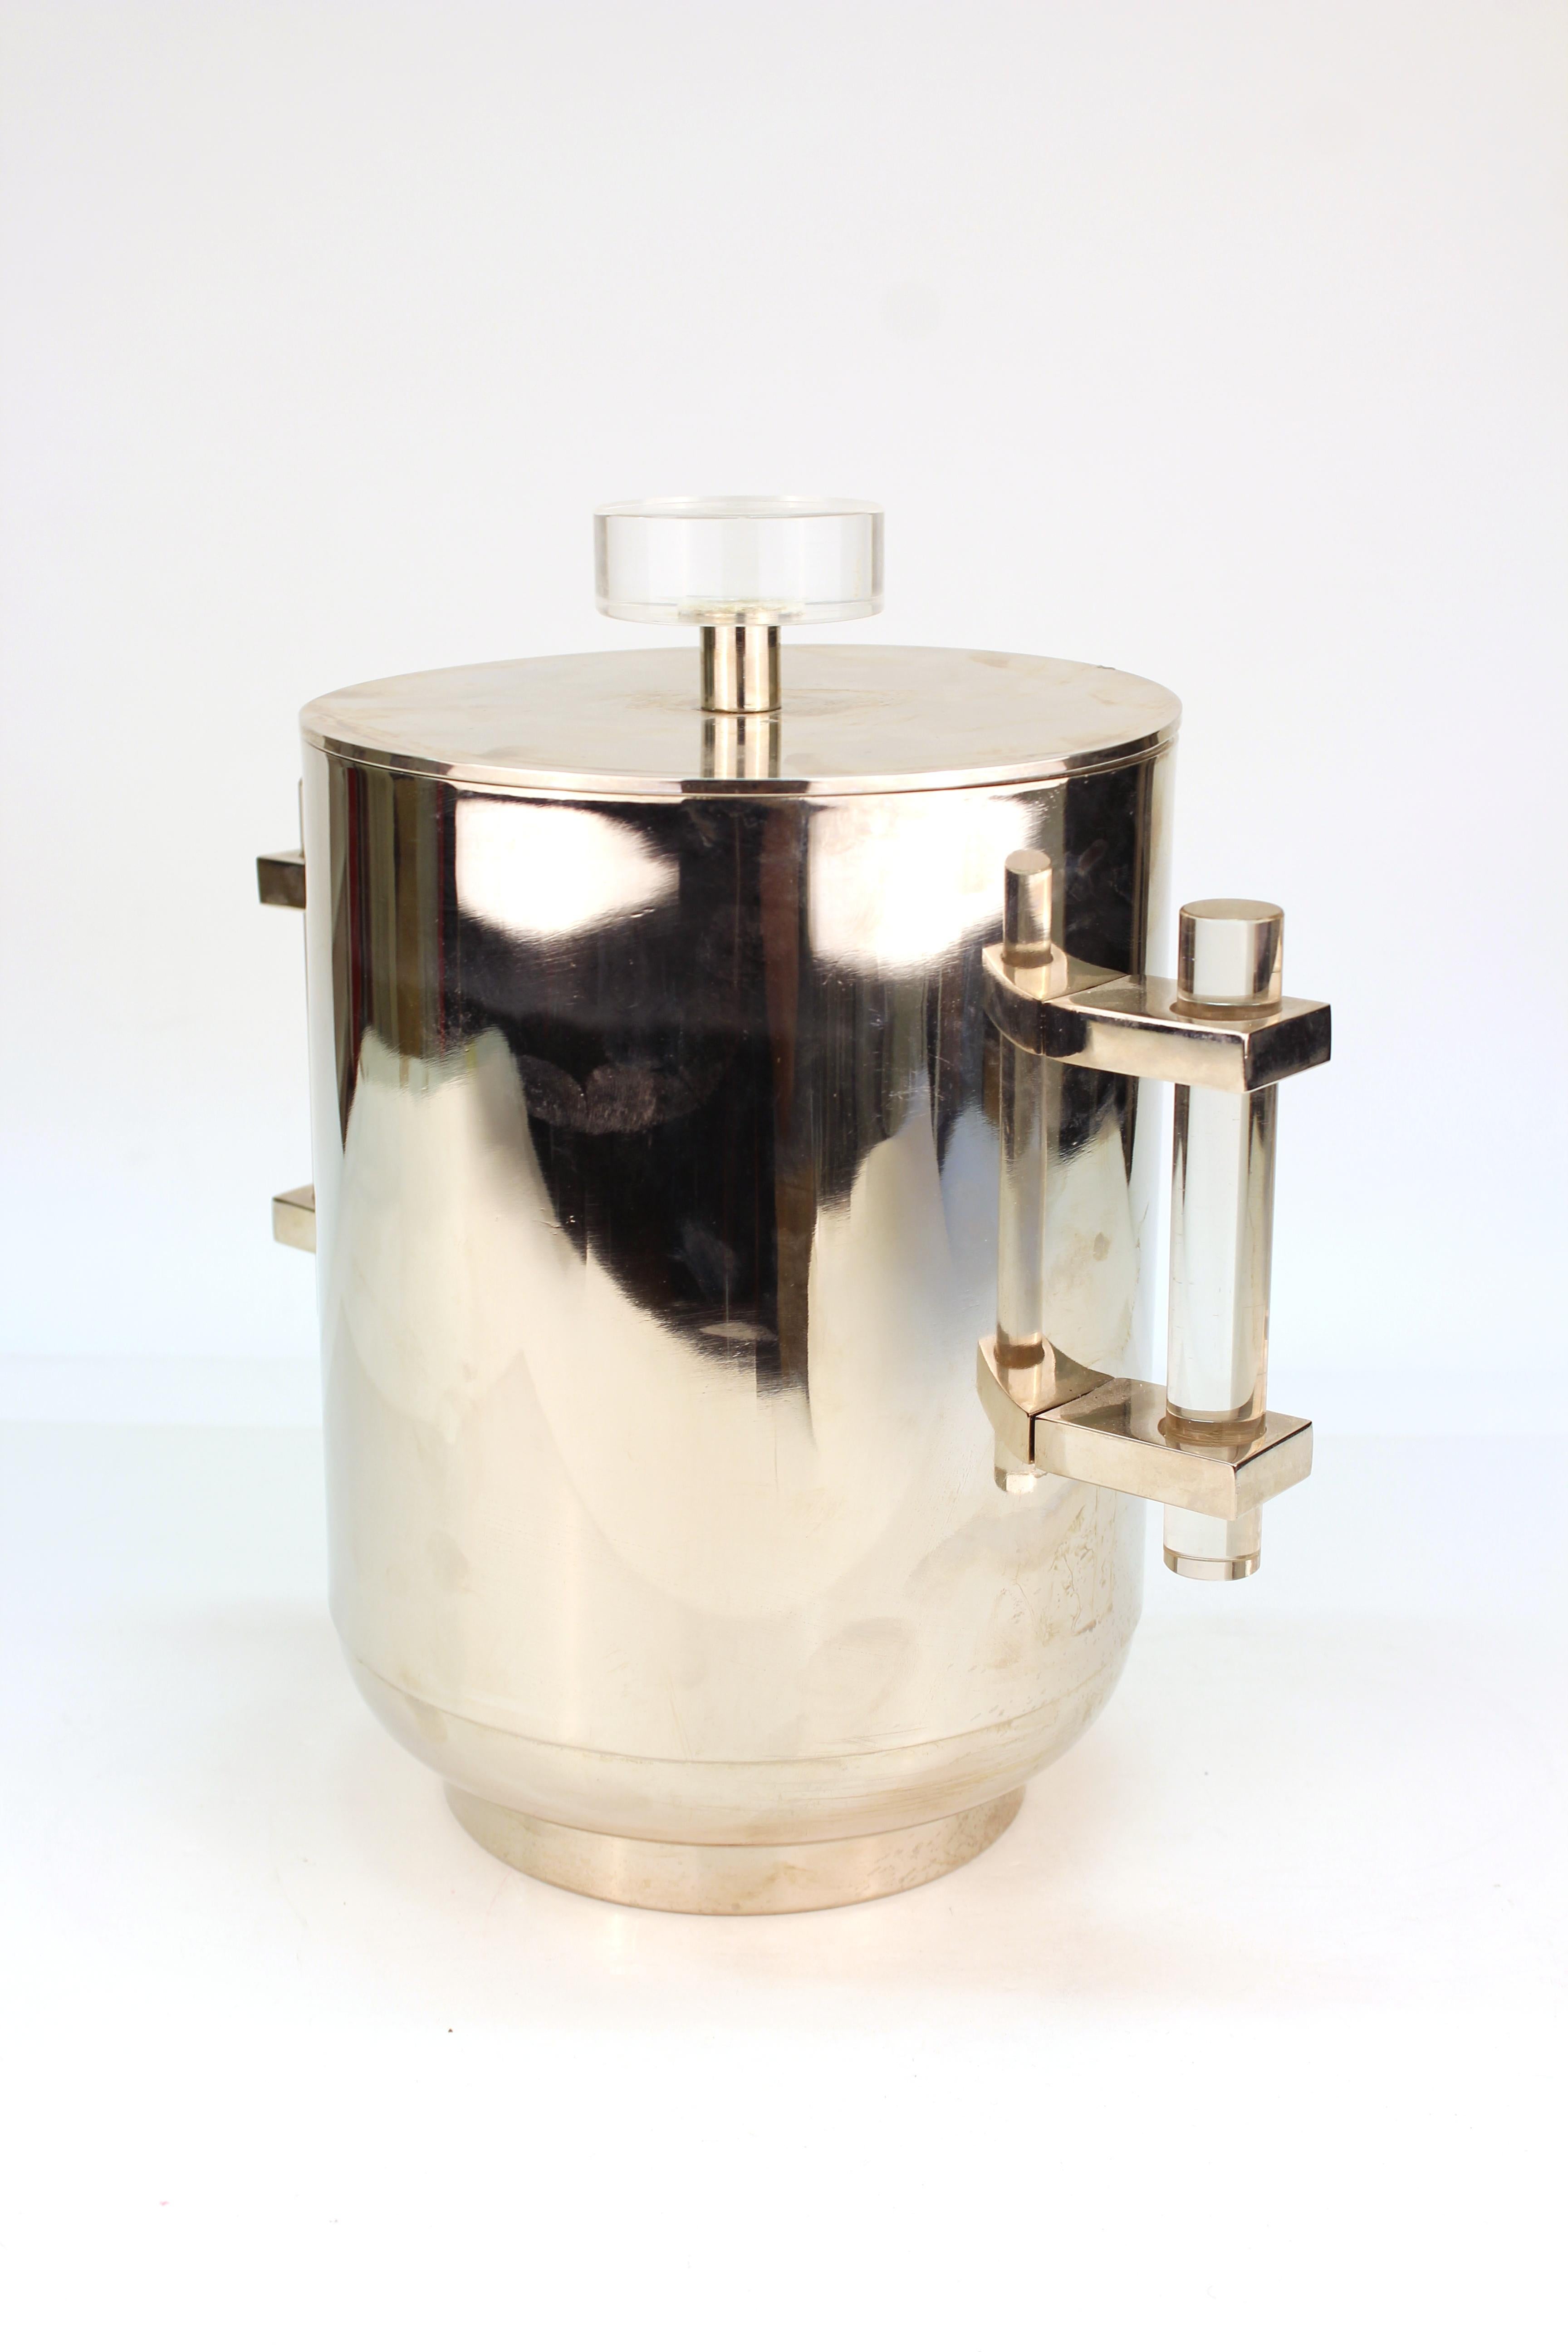 Mid-Century Modern ice bucket or champagne cooler in chromed metal with Lucite handles. The piece has a lid topped with a Lucite knob. Small dent on the lid but overall in great vintage condition.